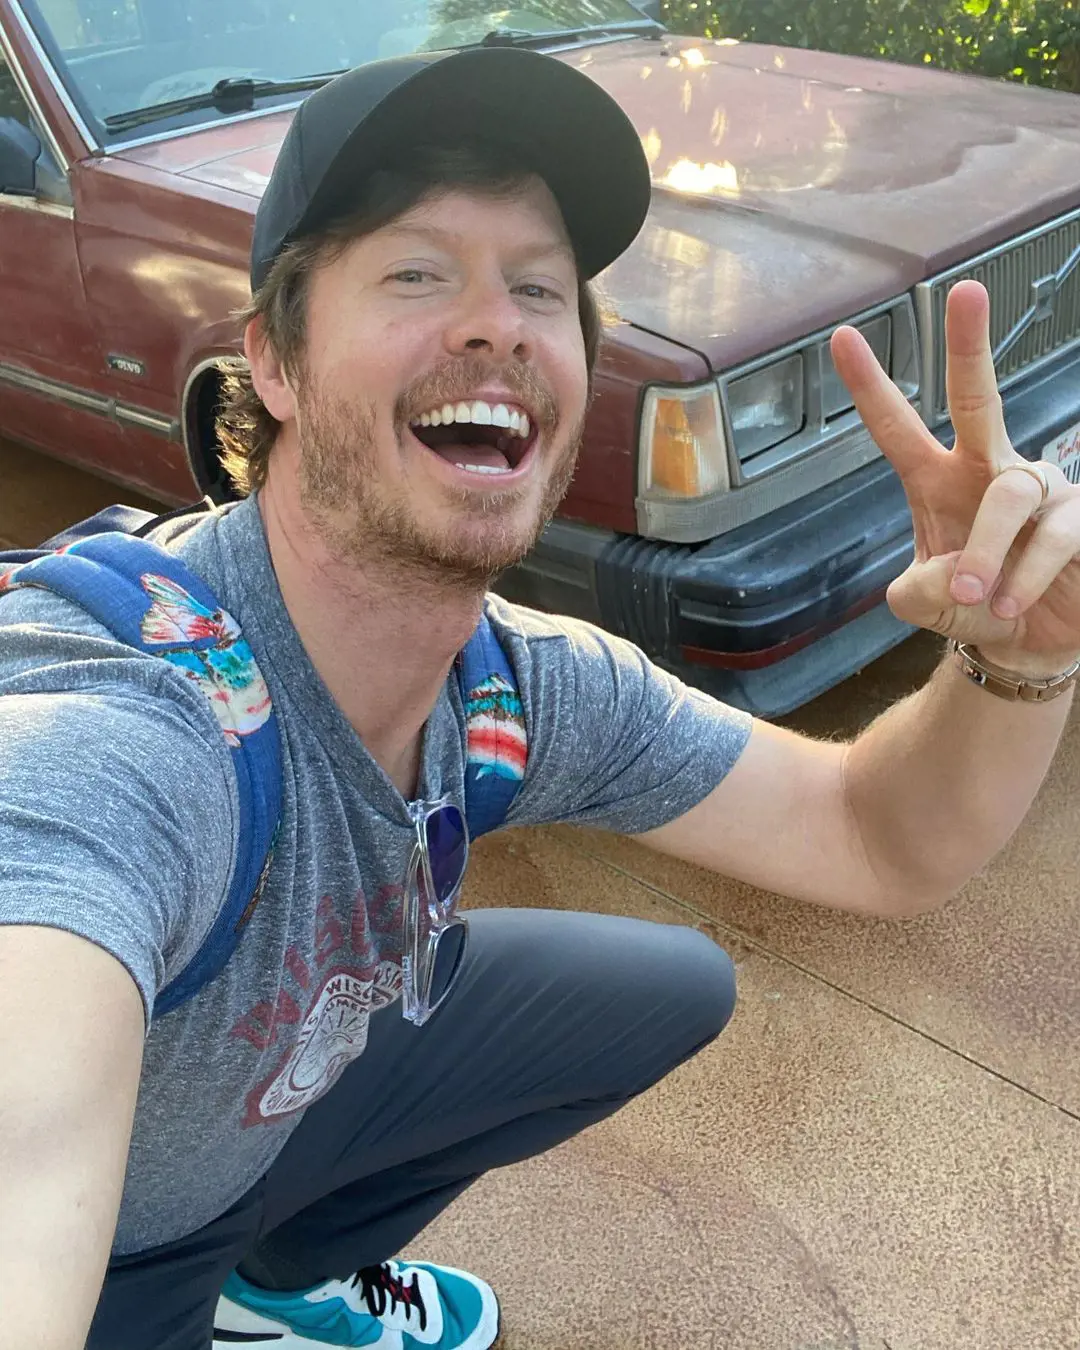 Anders shares a picture posing with his vintage car on Instagram